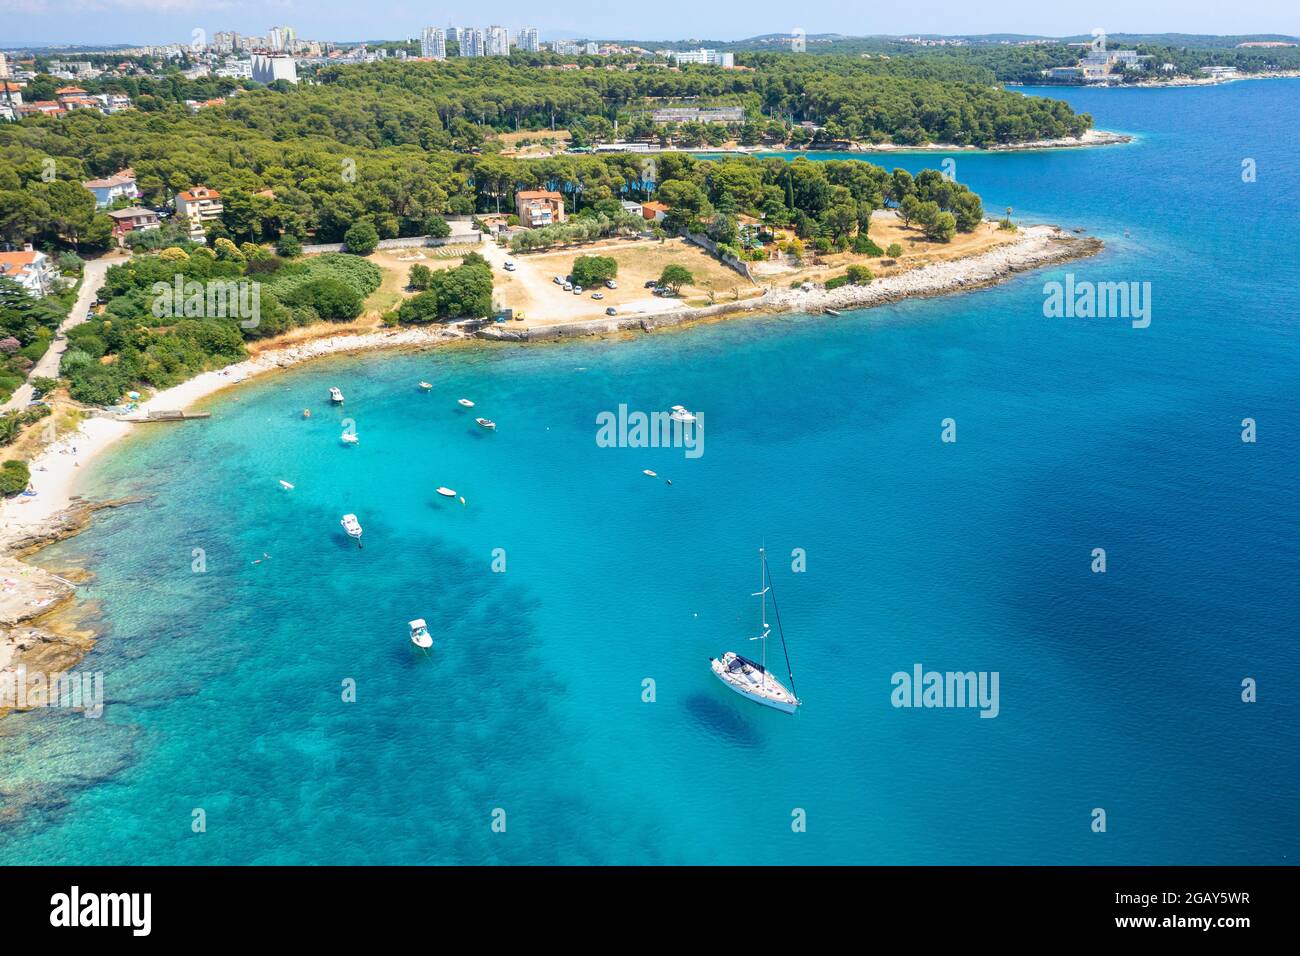 Aerial view of sailboat and small boats or yachts in the turquoise waters of the Adriatic sea close to beach of island. Stock Photo